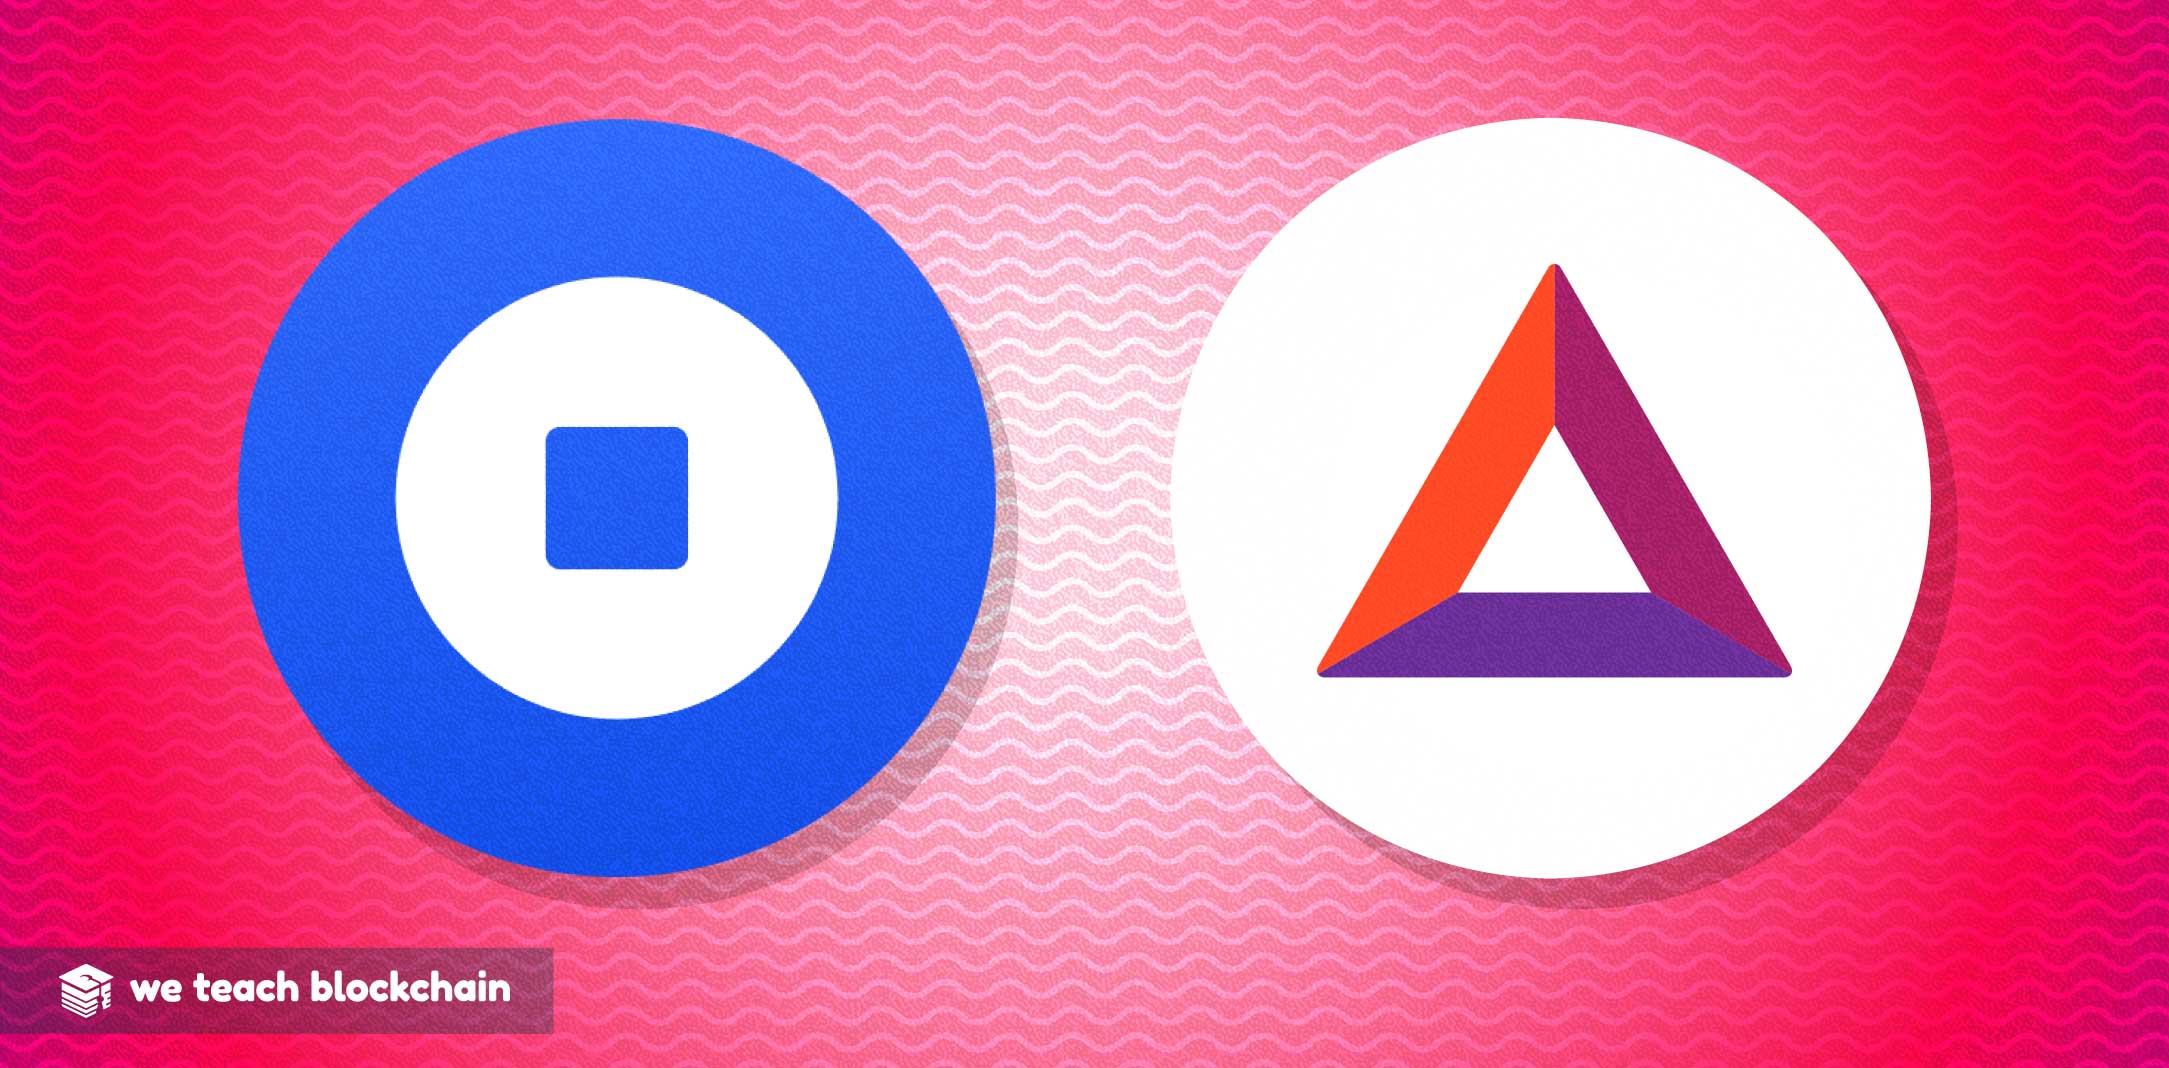 The Coinbase wallet and brave logos next to each other